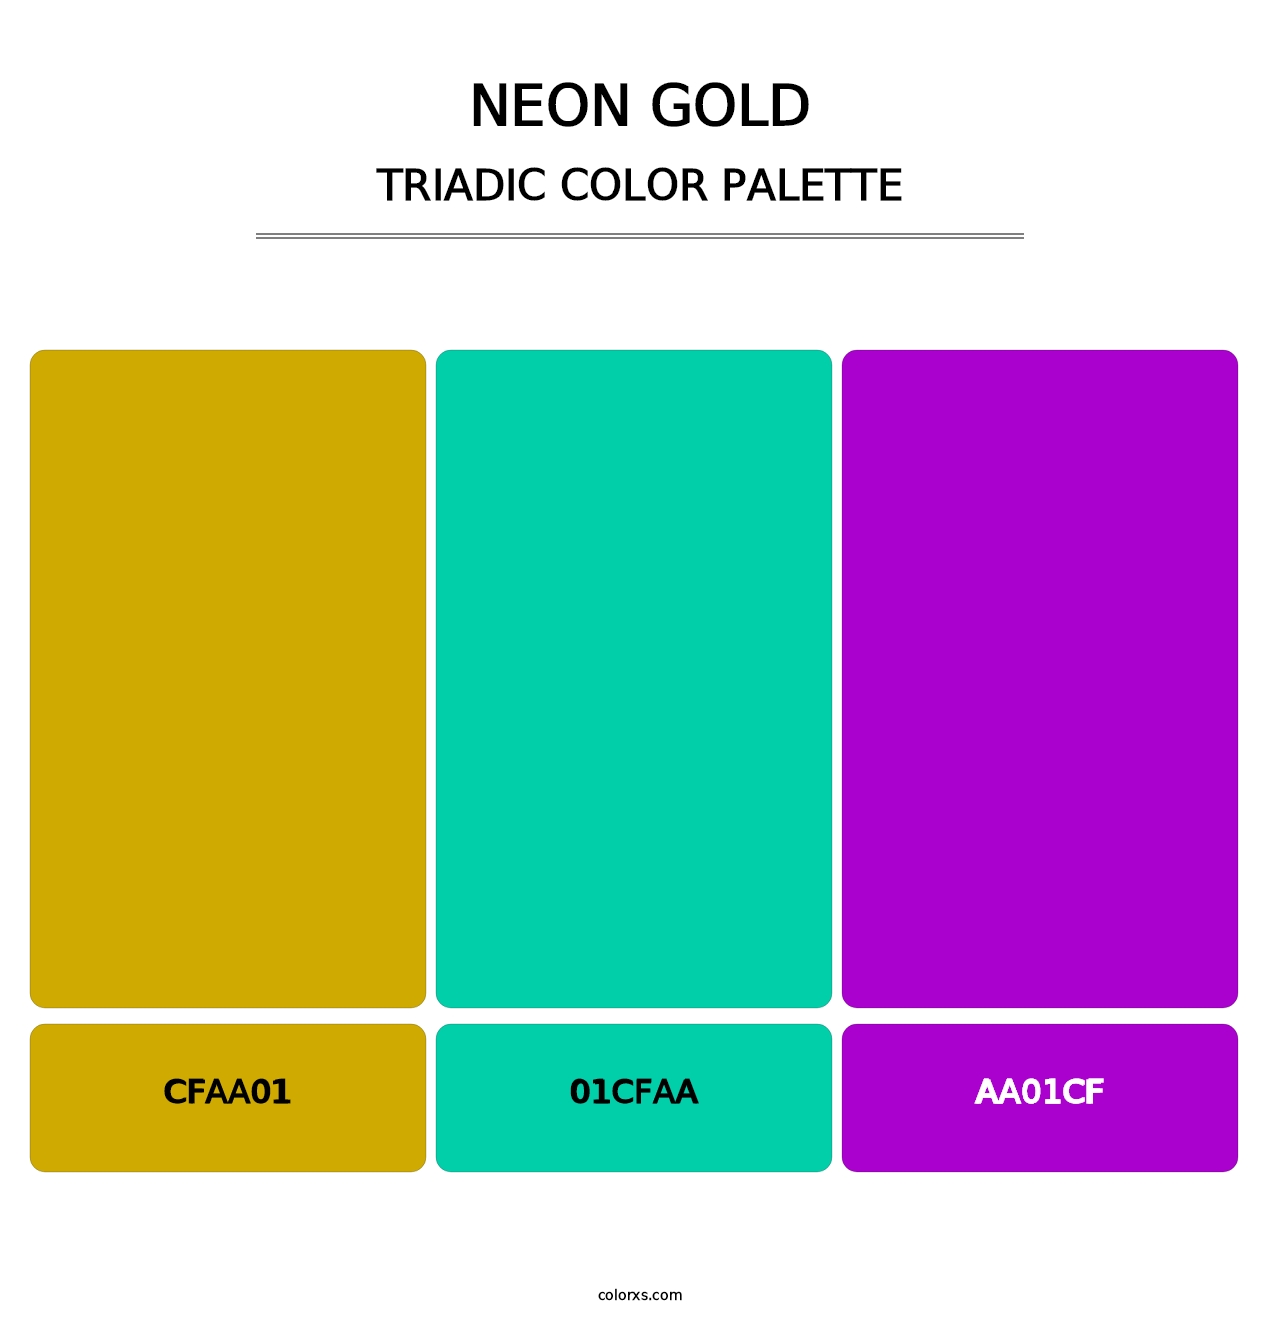 Neon Gold - Triadic Color Palette